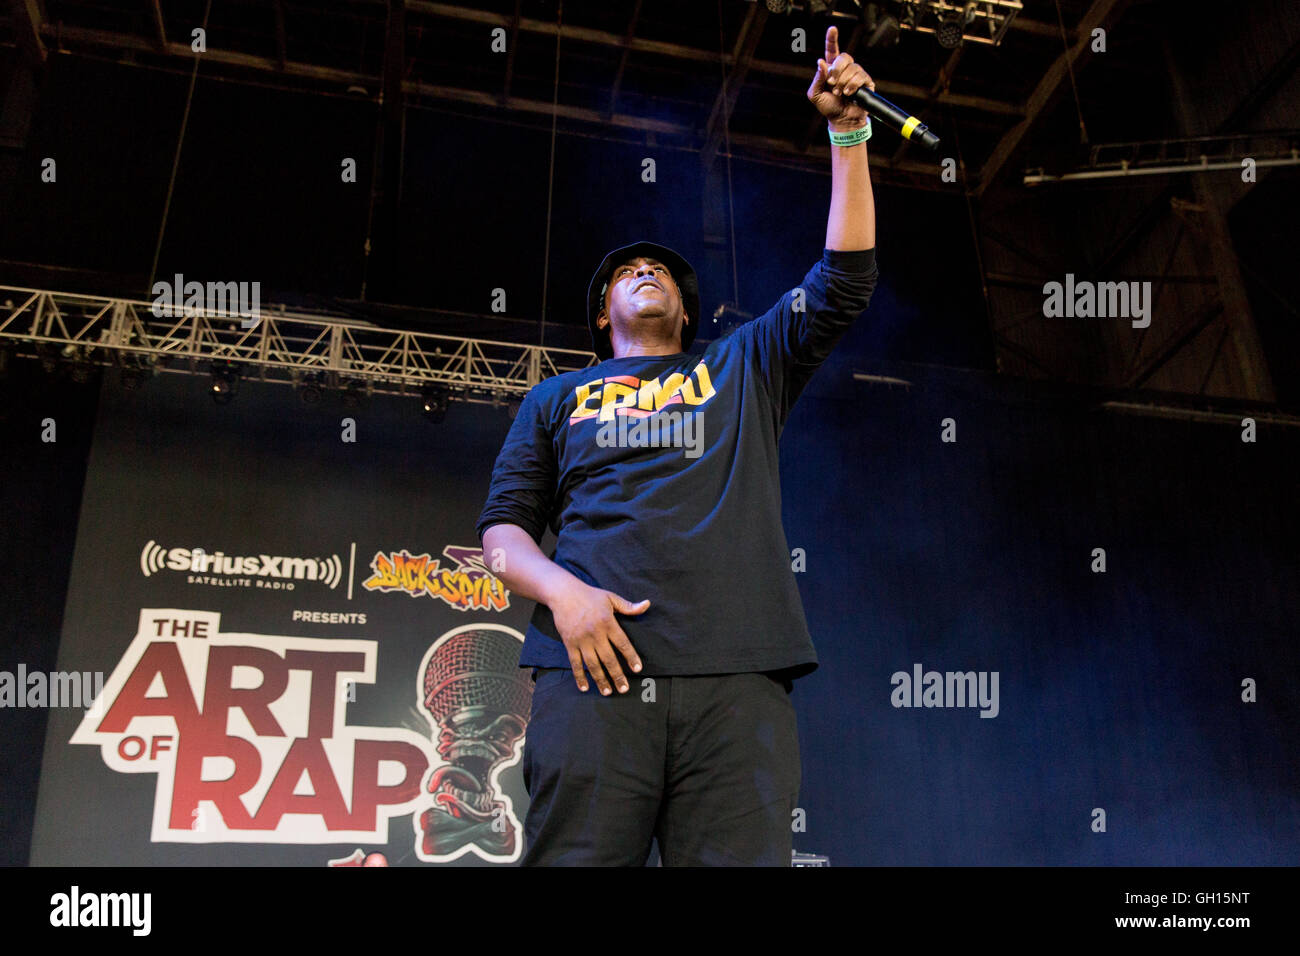 Tinley Park, Illinois, USA. 5th Aug, 2016. of EPMD performs live at Hollywood Casino Amphitheater during the Art of Rap Festival in Tinley Park, Illinois © Daniel DeSlover/ZUMA Wire/Alamy Live News Stock Photo